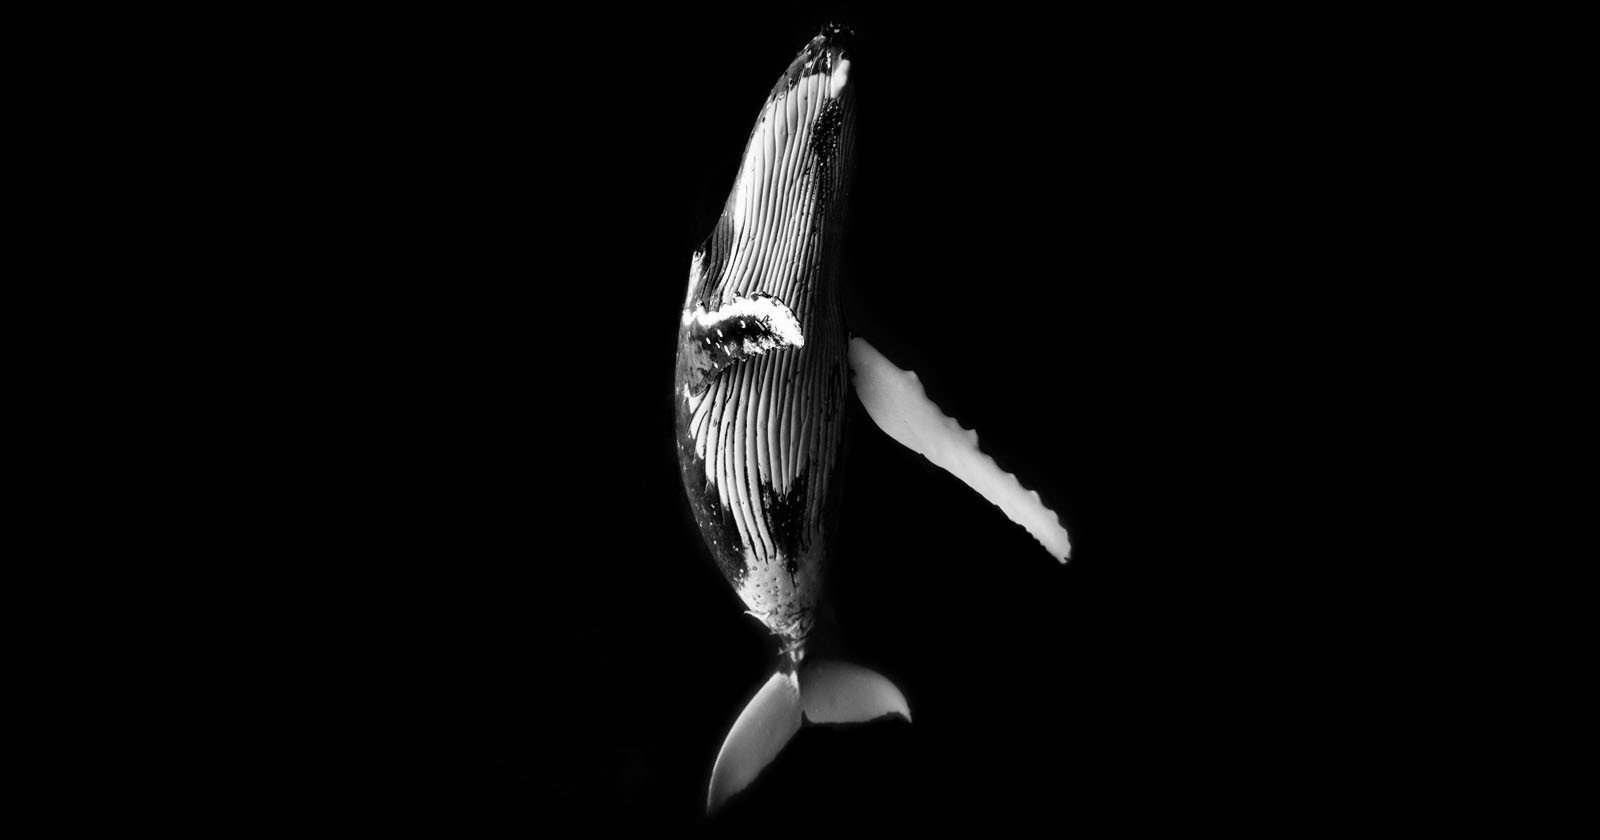  underwater photo series showcases beauty humpback whales 